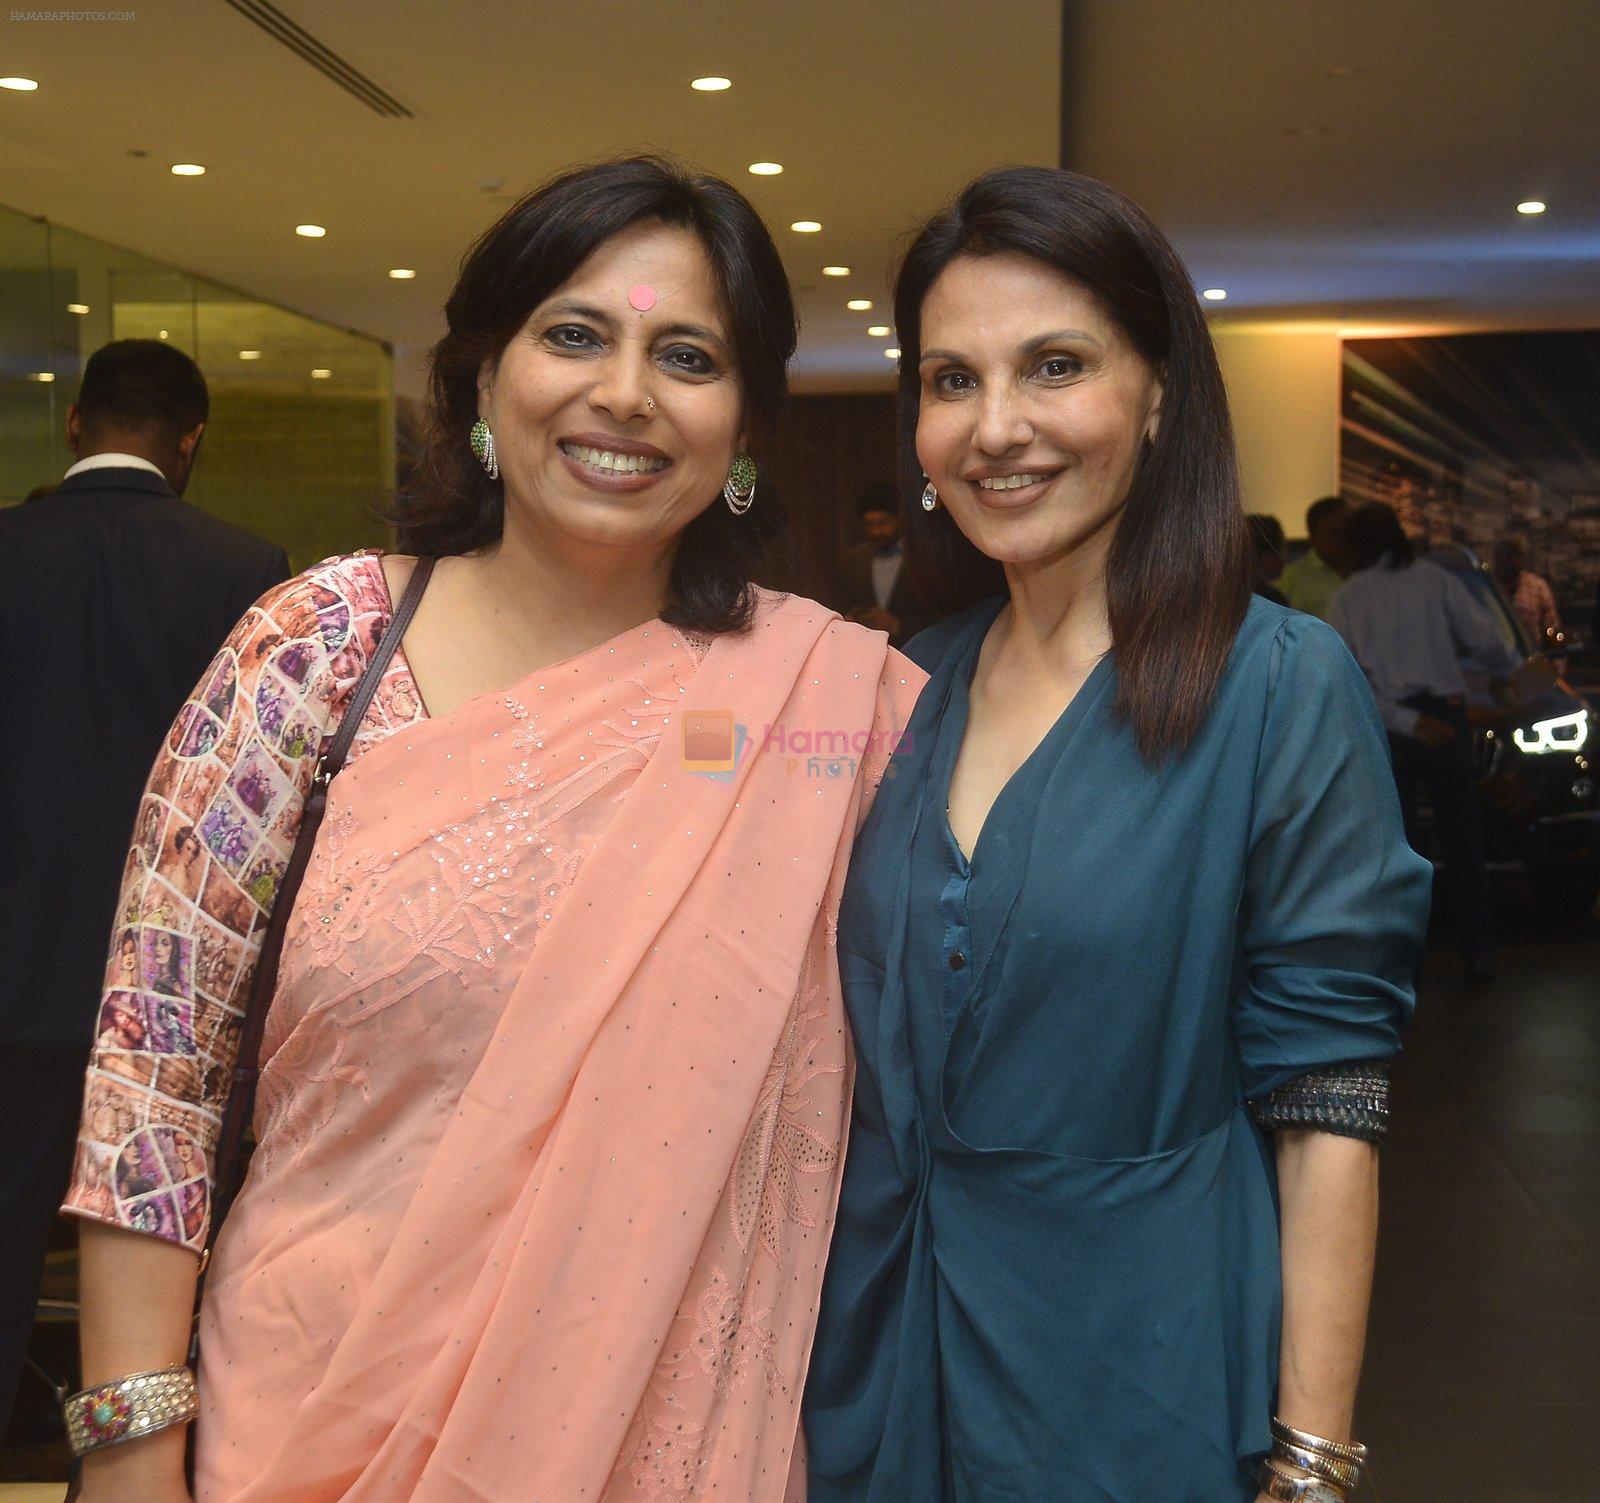 abha singh and poonam soni at Poonam Soni's BMW car launch on 7th May 2016